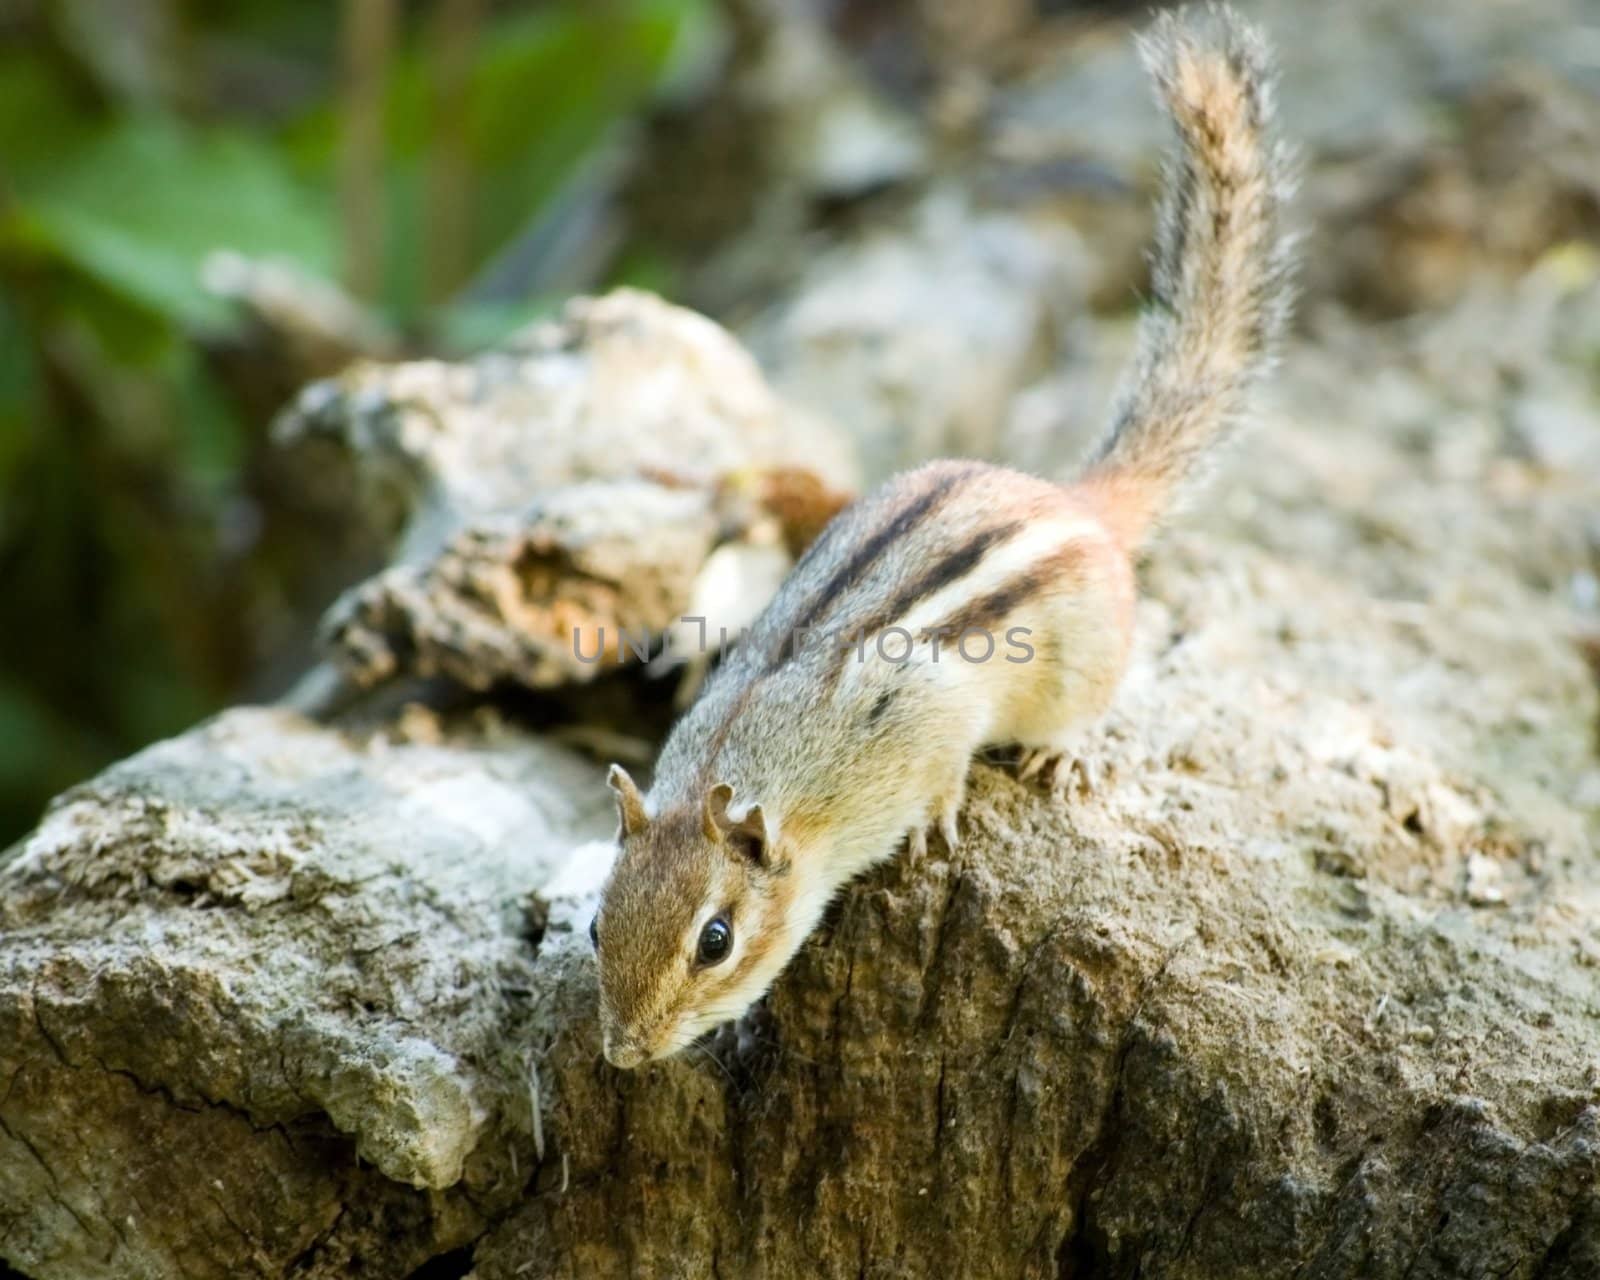 A chipmunk perched on a log ready to jump down to the ground.